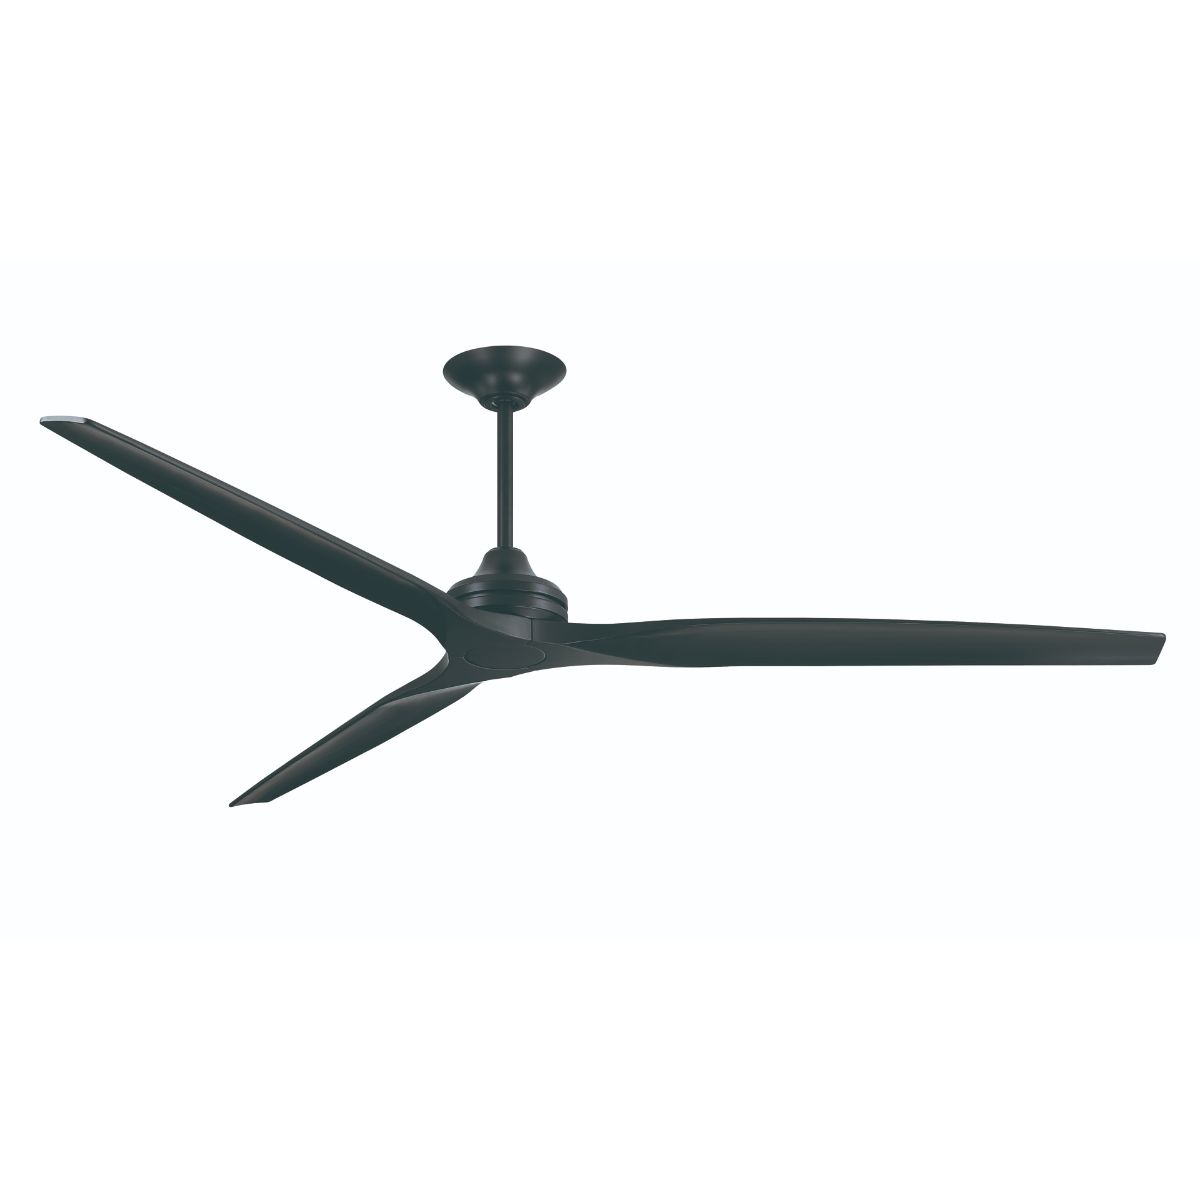 Spitfire DC Outdoor Ceiling Fan Motor With Remote, Black Finish, Set of 3 Blades Sold Separately - Bees Lighting